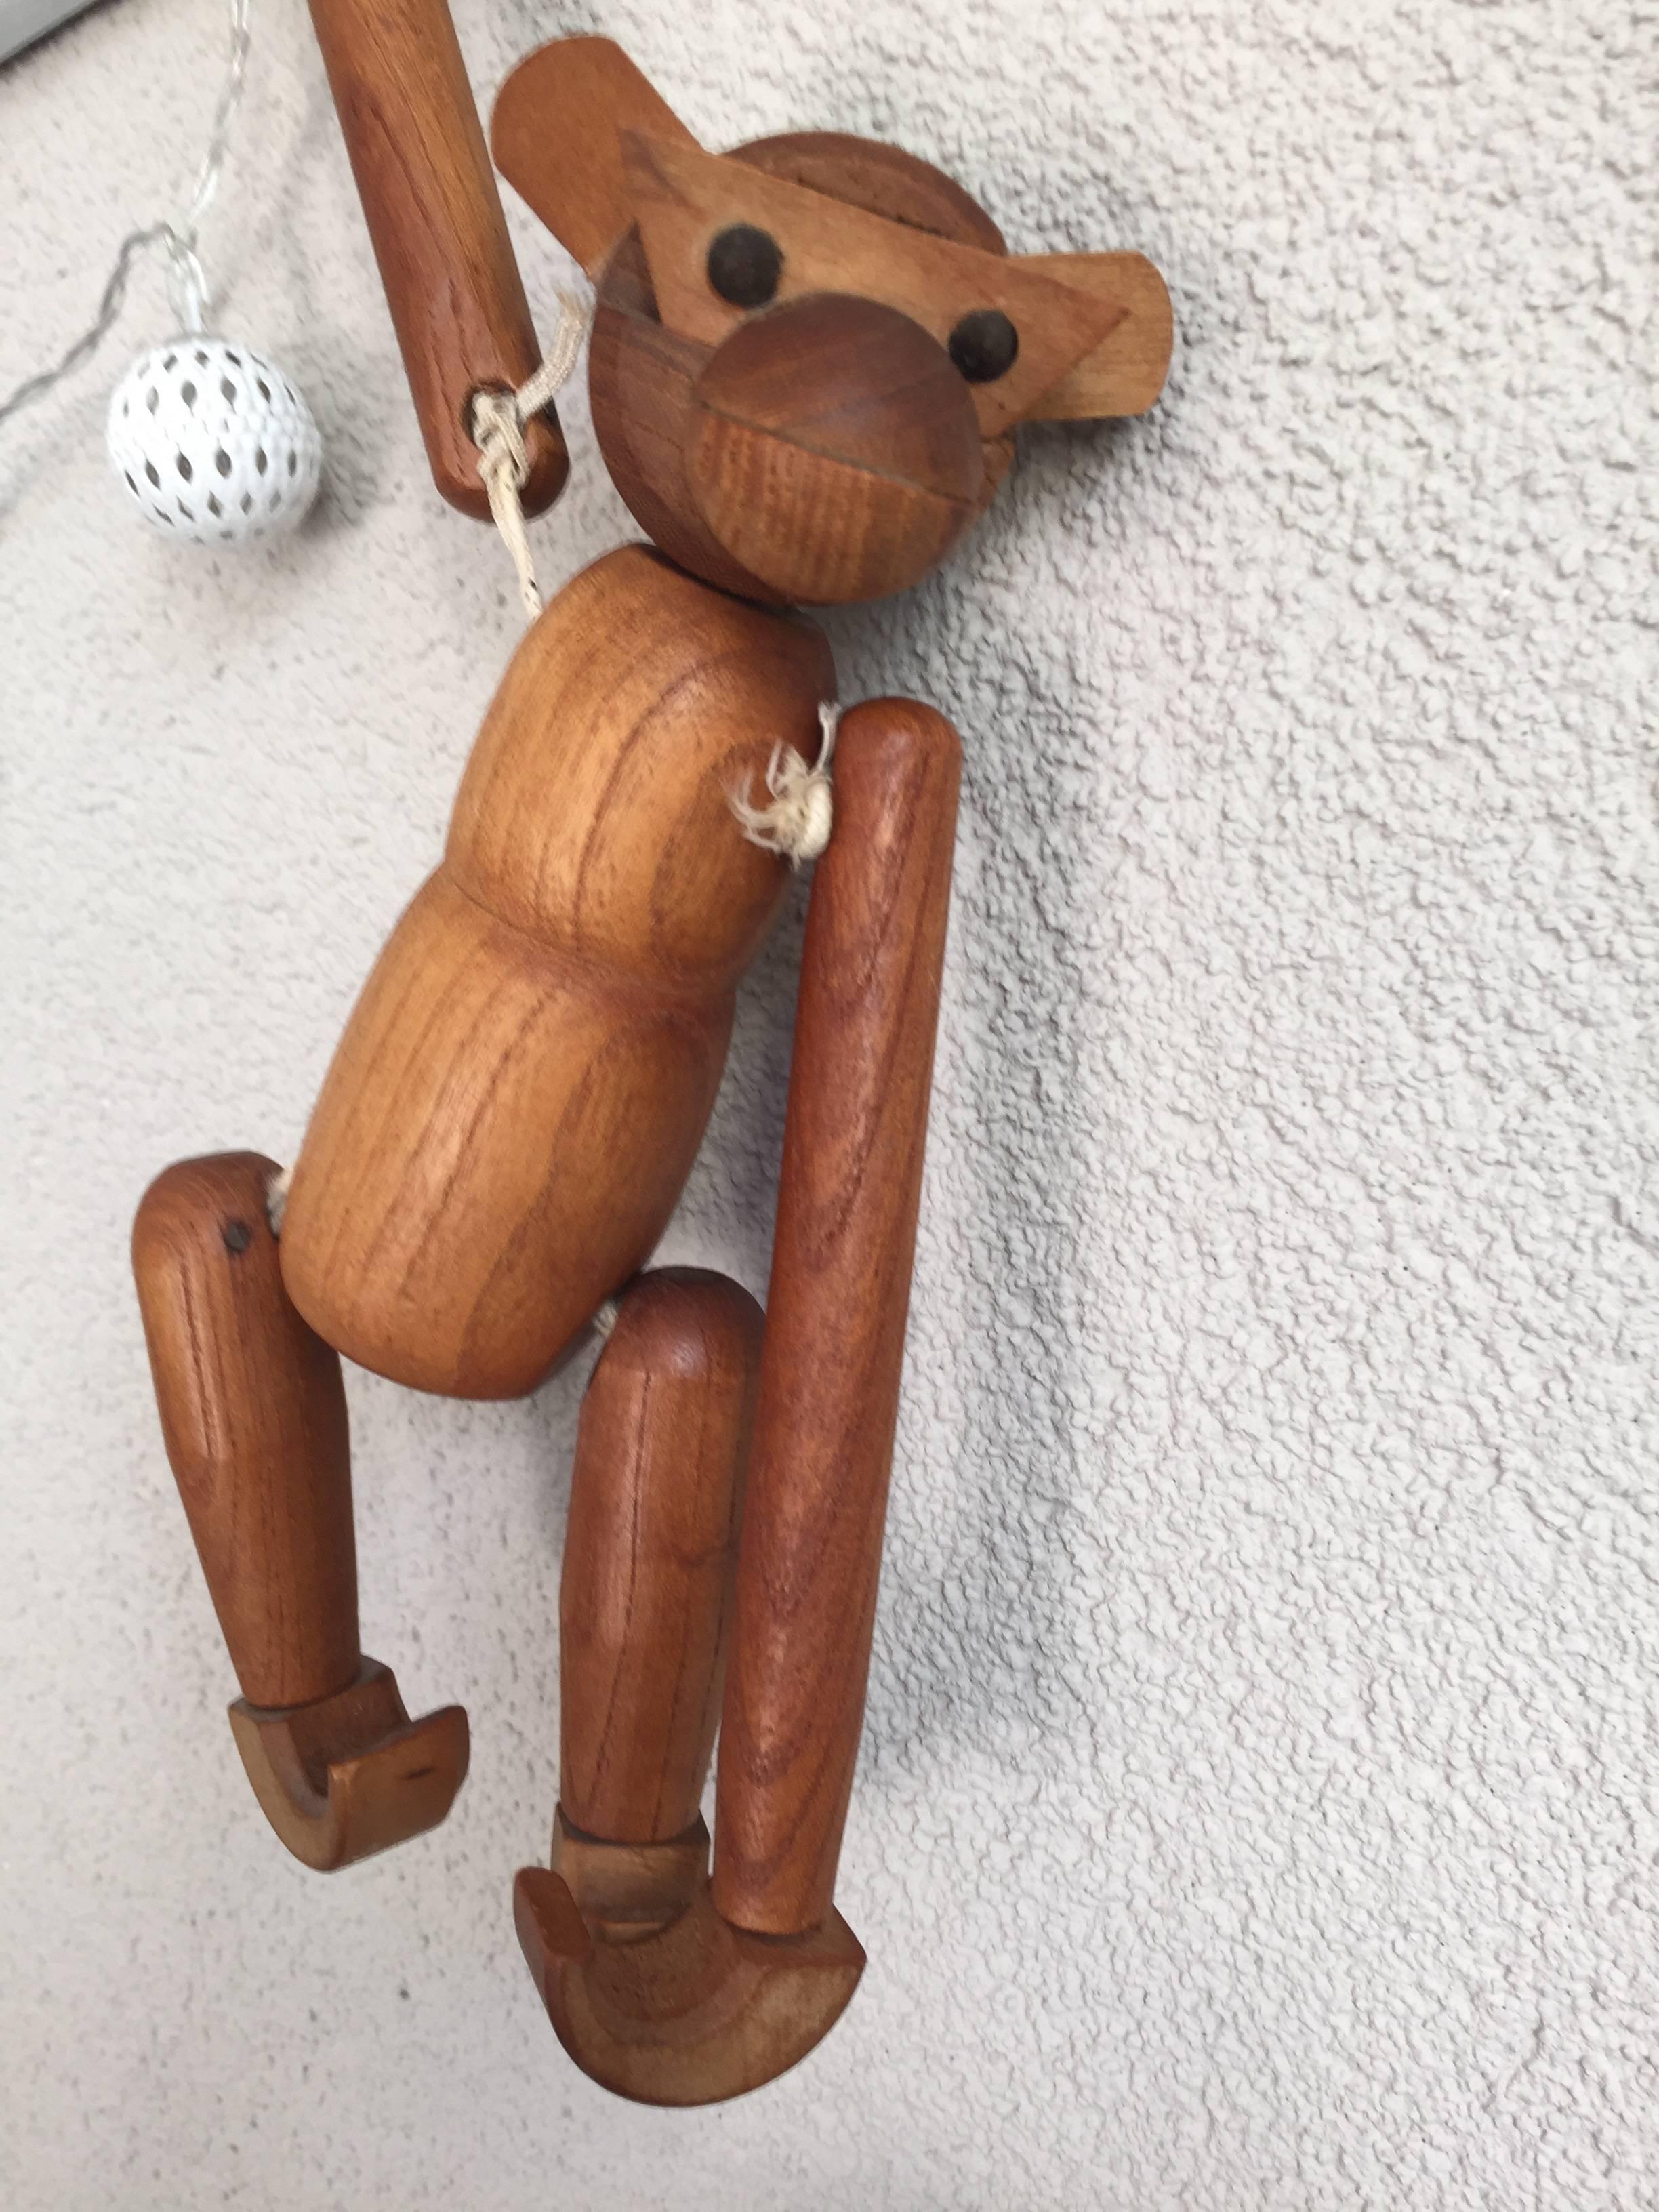 Hand-Crafted Vintage Danish Wooden Monkey by Kay Bojesen